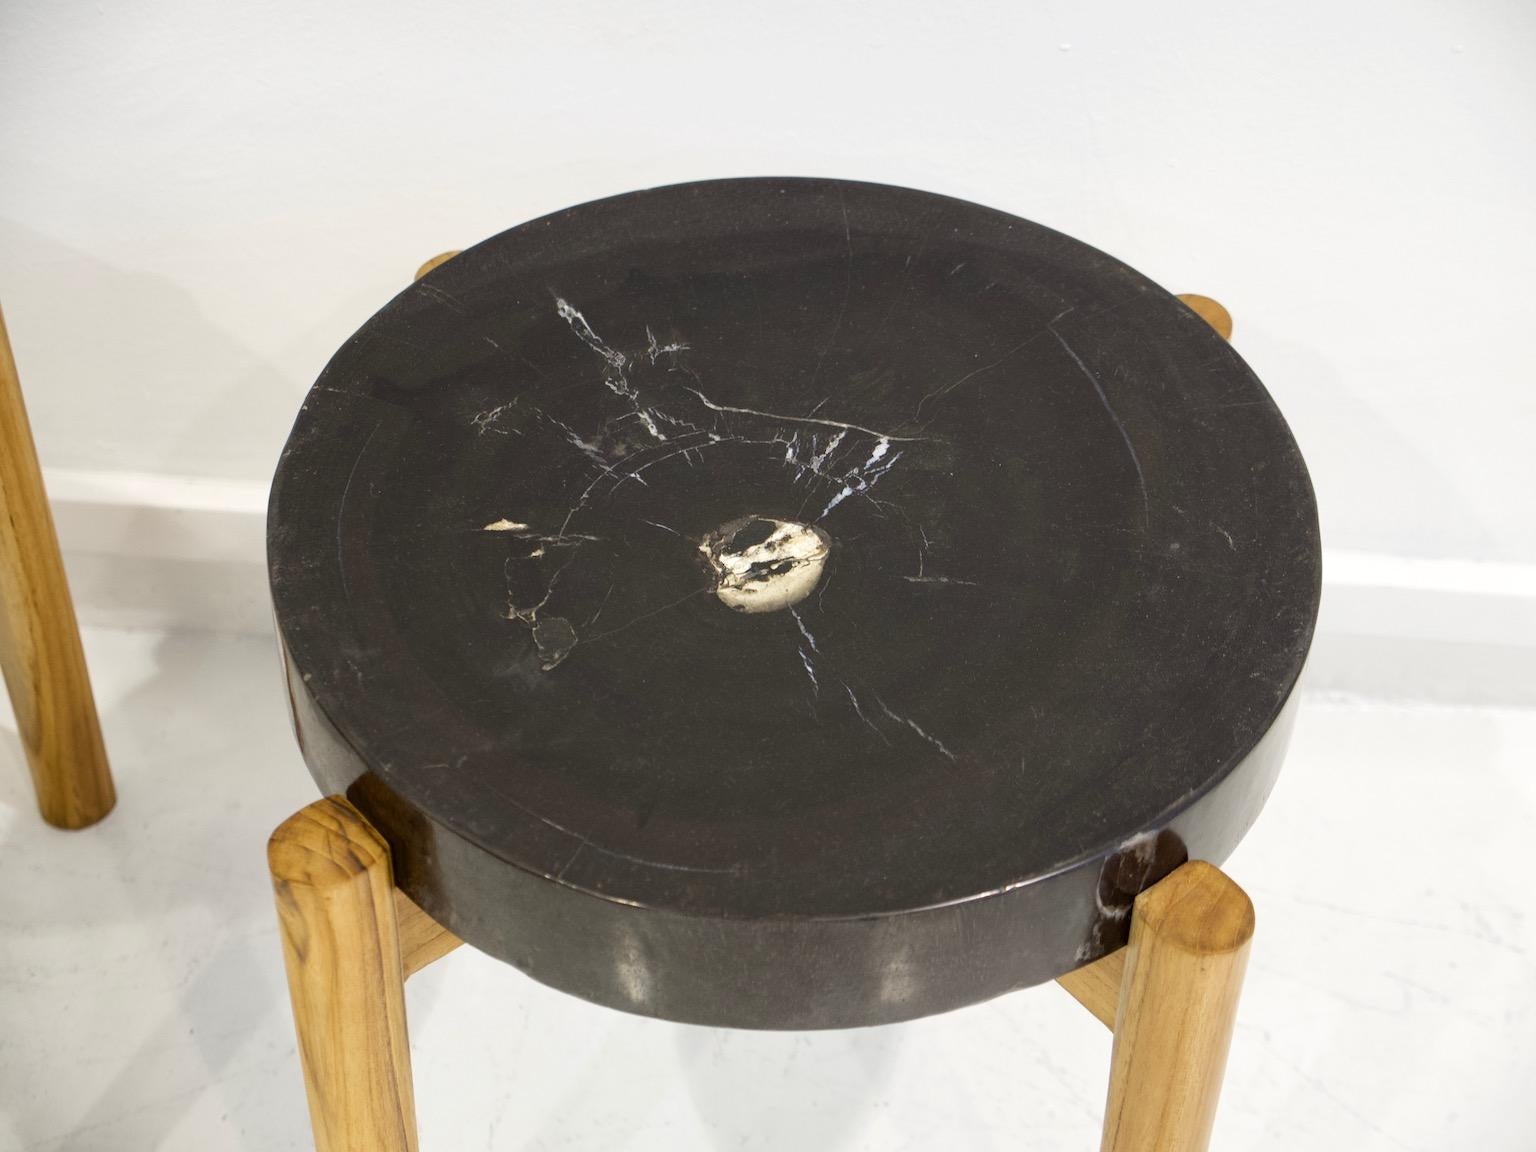 Contemporary Pair of Side Tables with Wooden Feet and Dark Petrified Wood Top